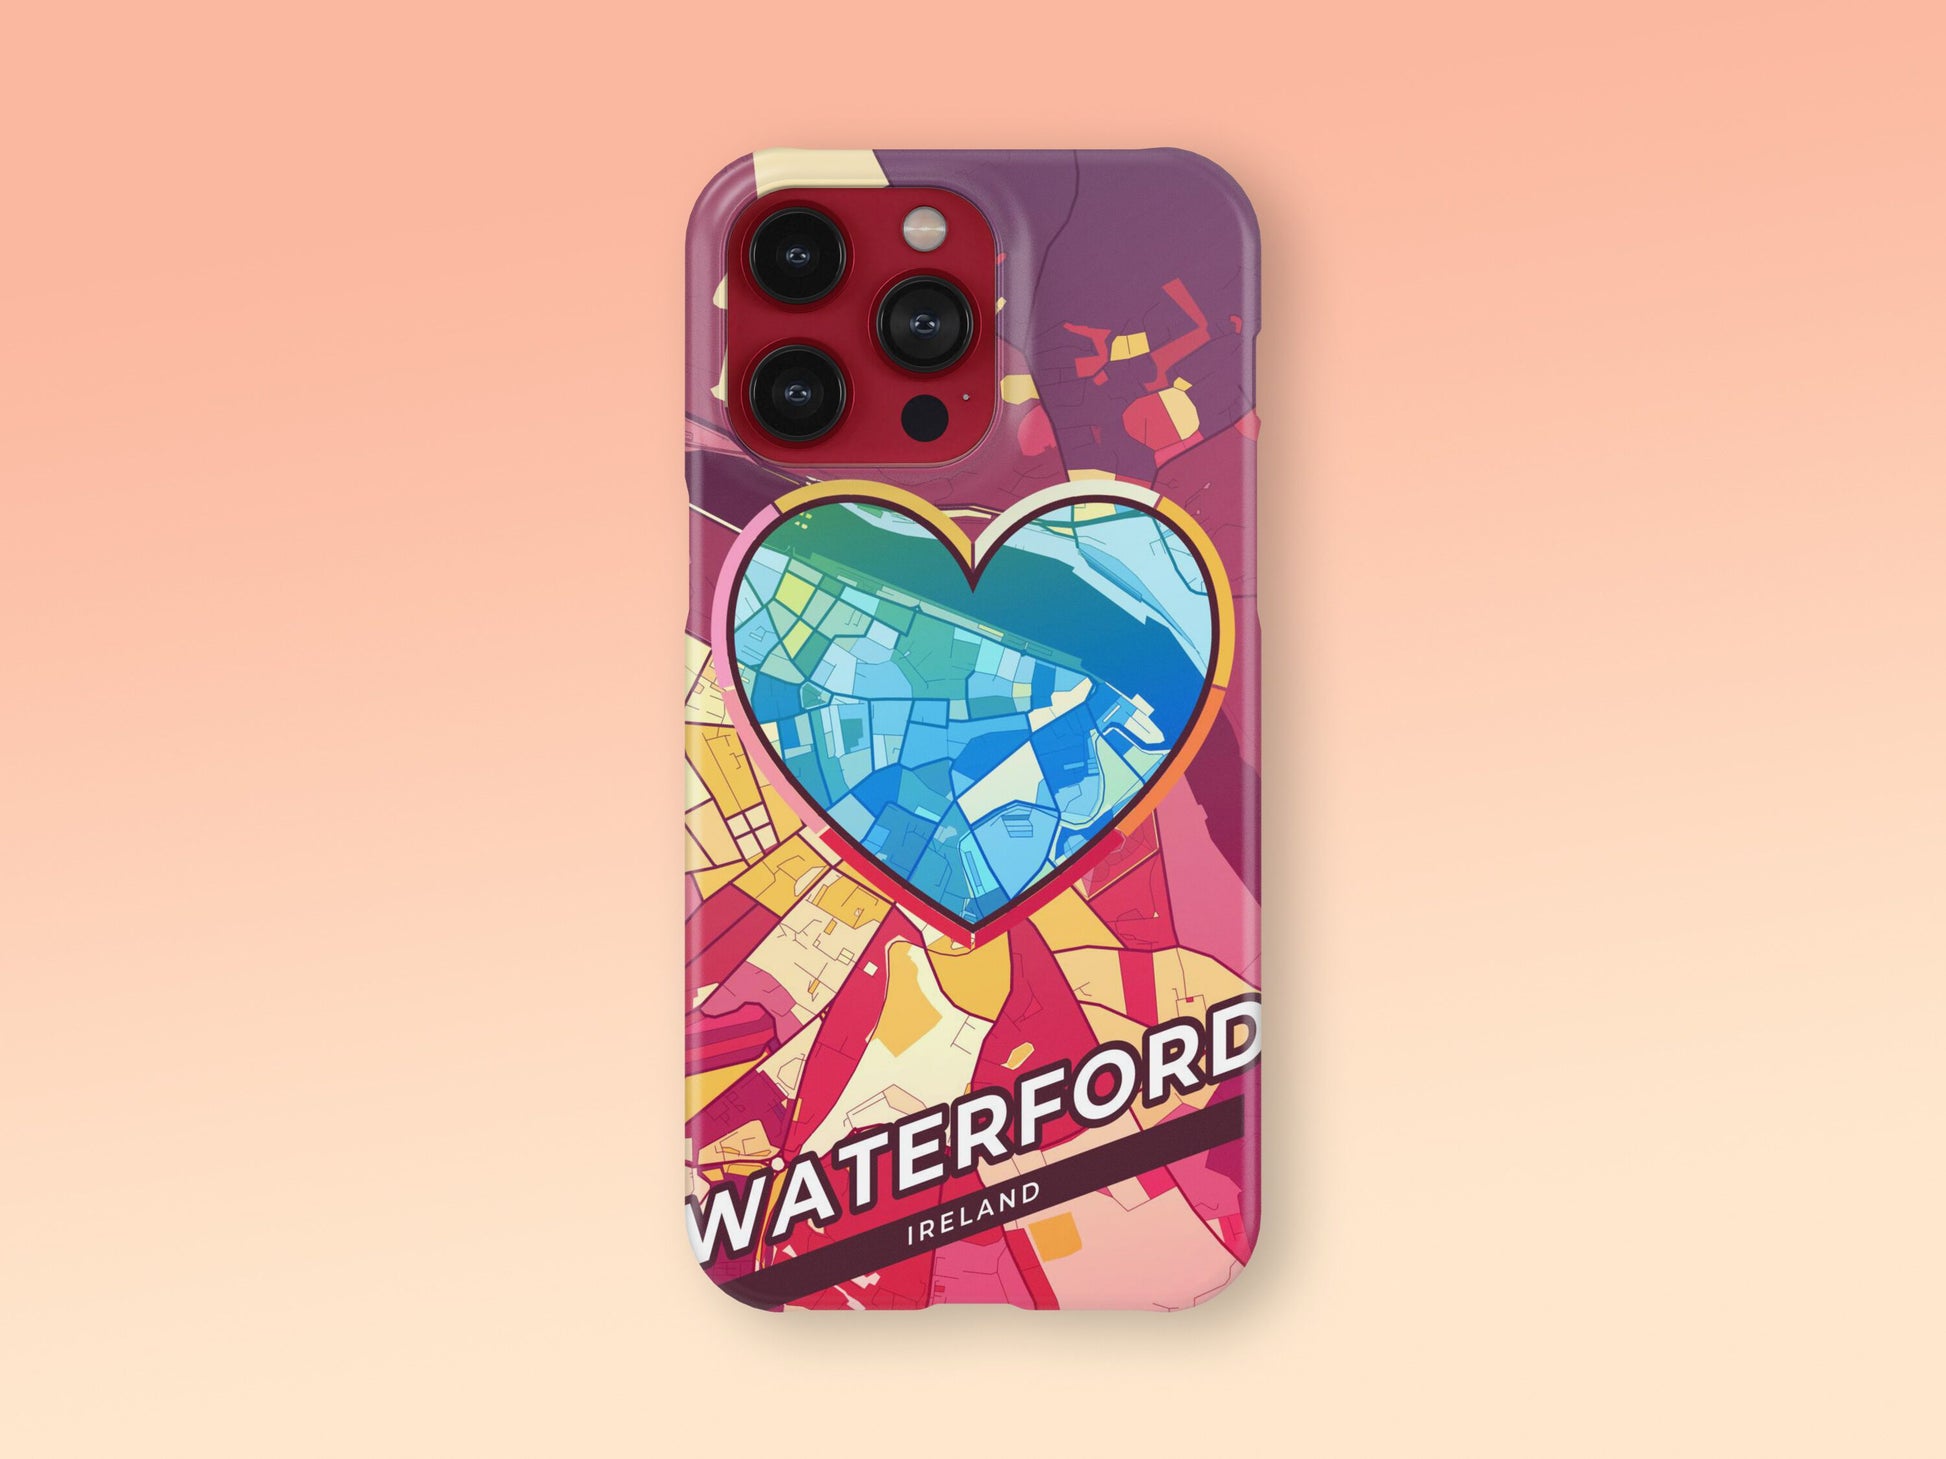 Waterford Ireland slim phone case with colorful icon 2